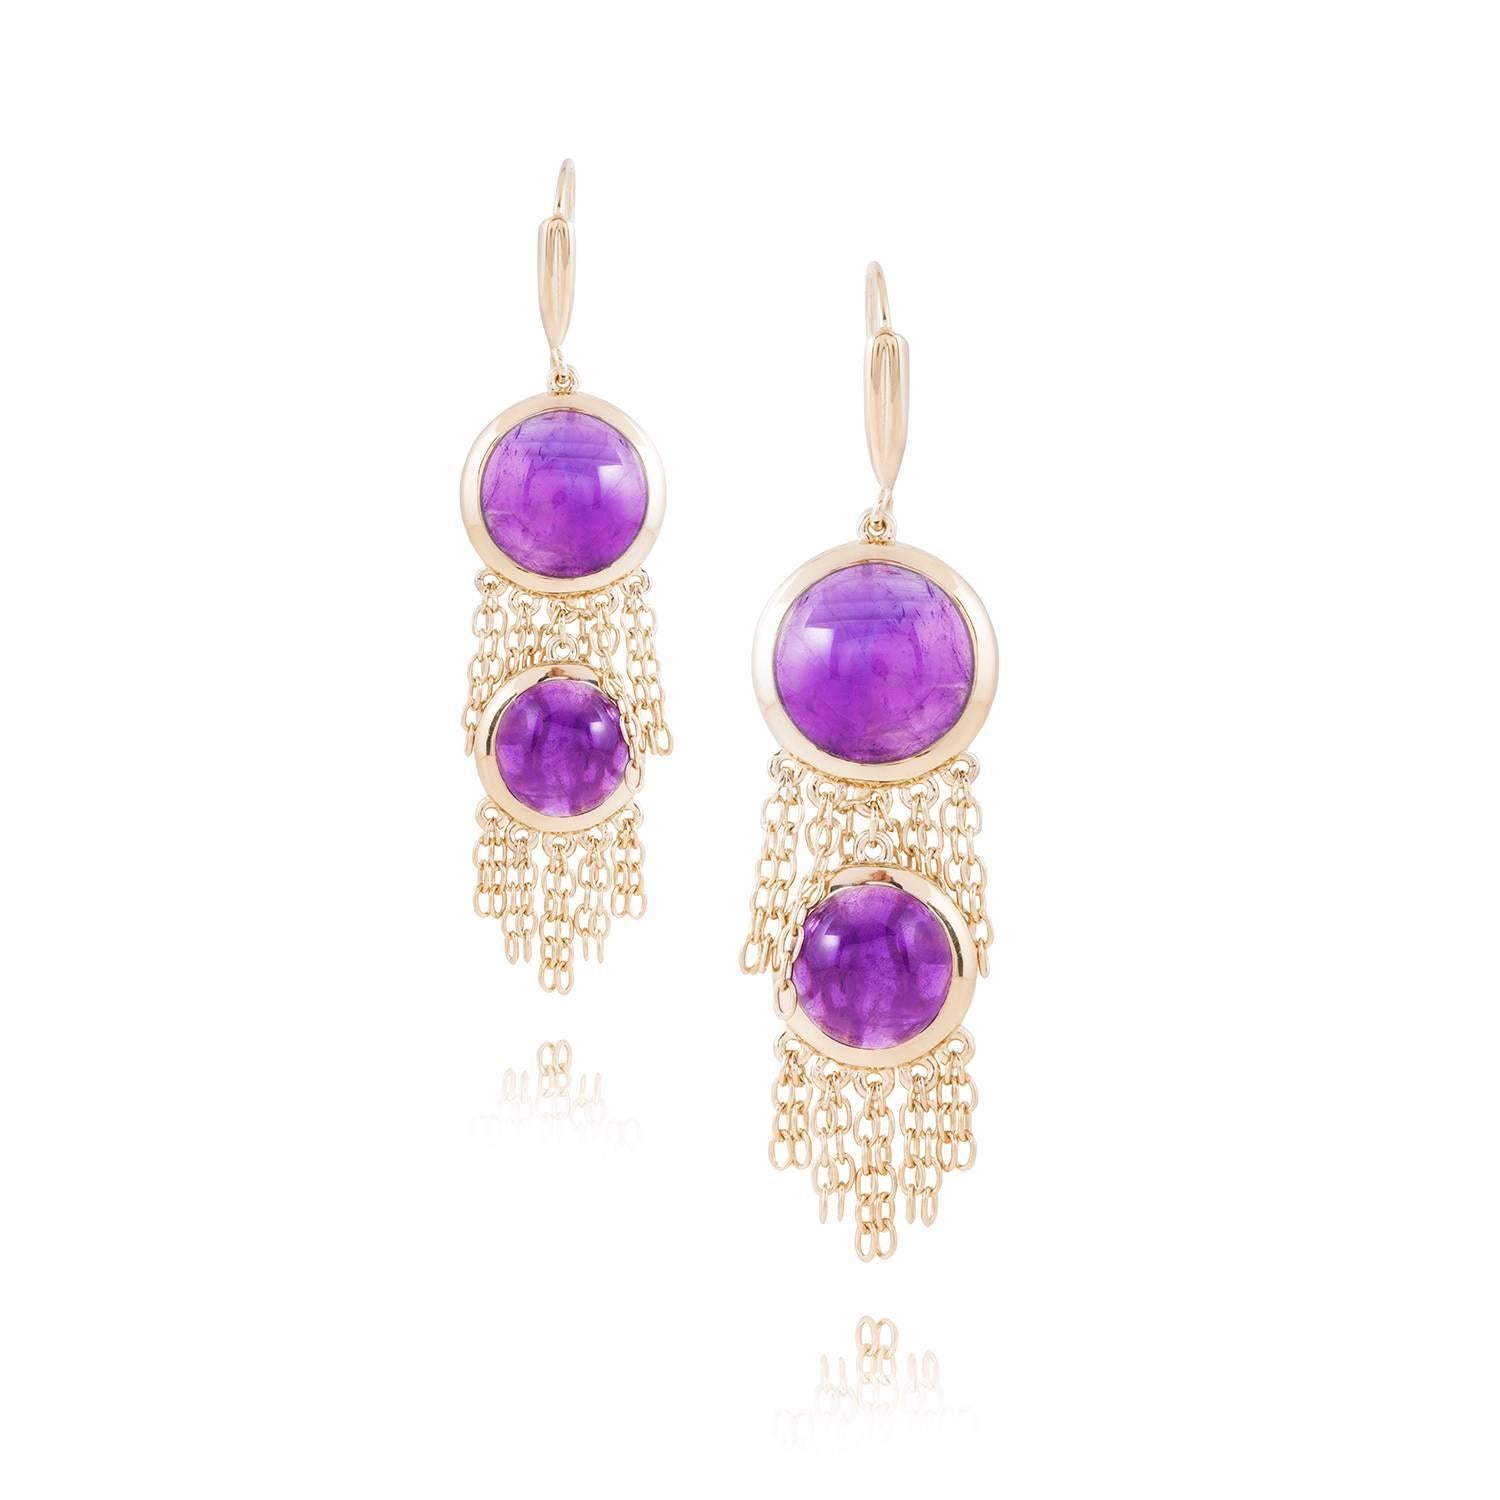 18kt Gold Vermeil (2.5 microns) on 925 Silver (Rhodium coated to enhance the colour of the metal)

These light and delicate chain earrings are perfect for evening or special occasions.

They feature two natural amethyst cabochons with chain